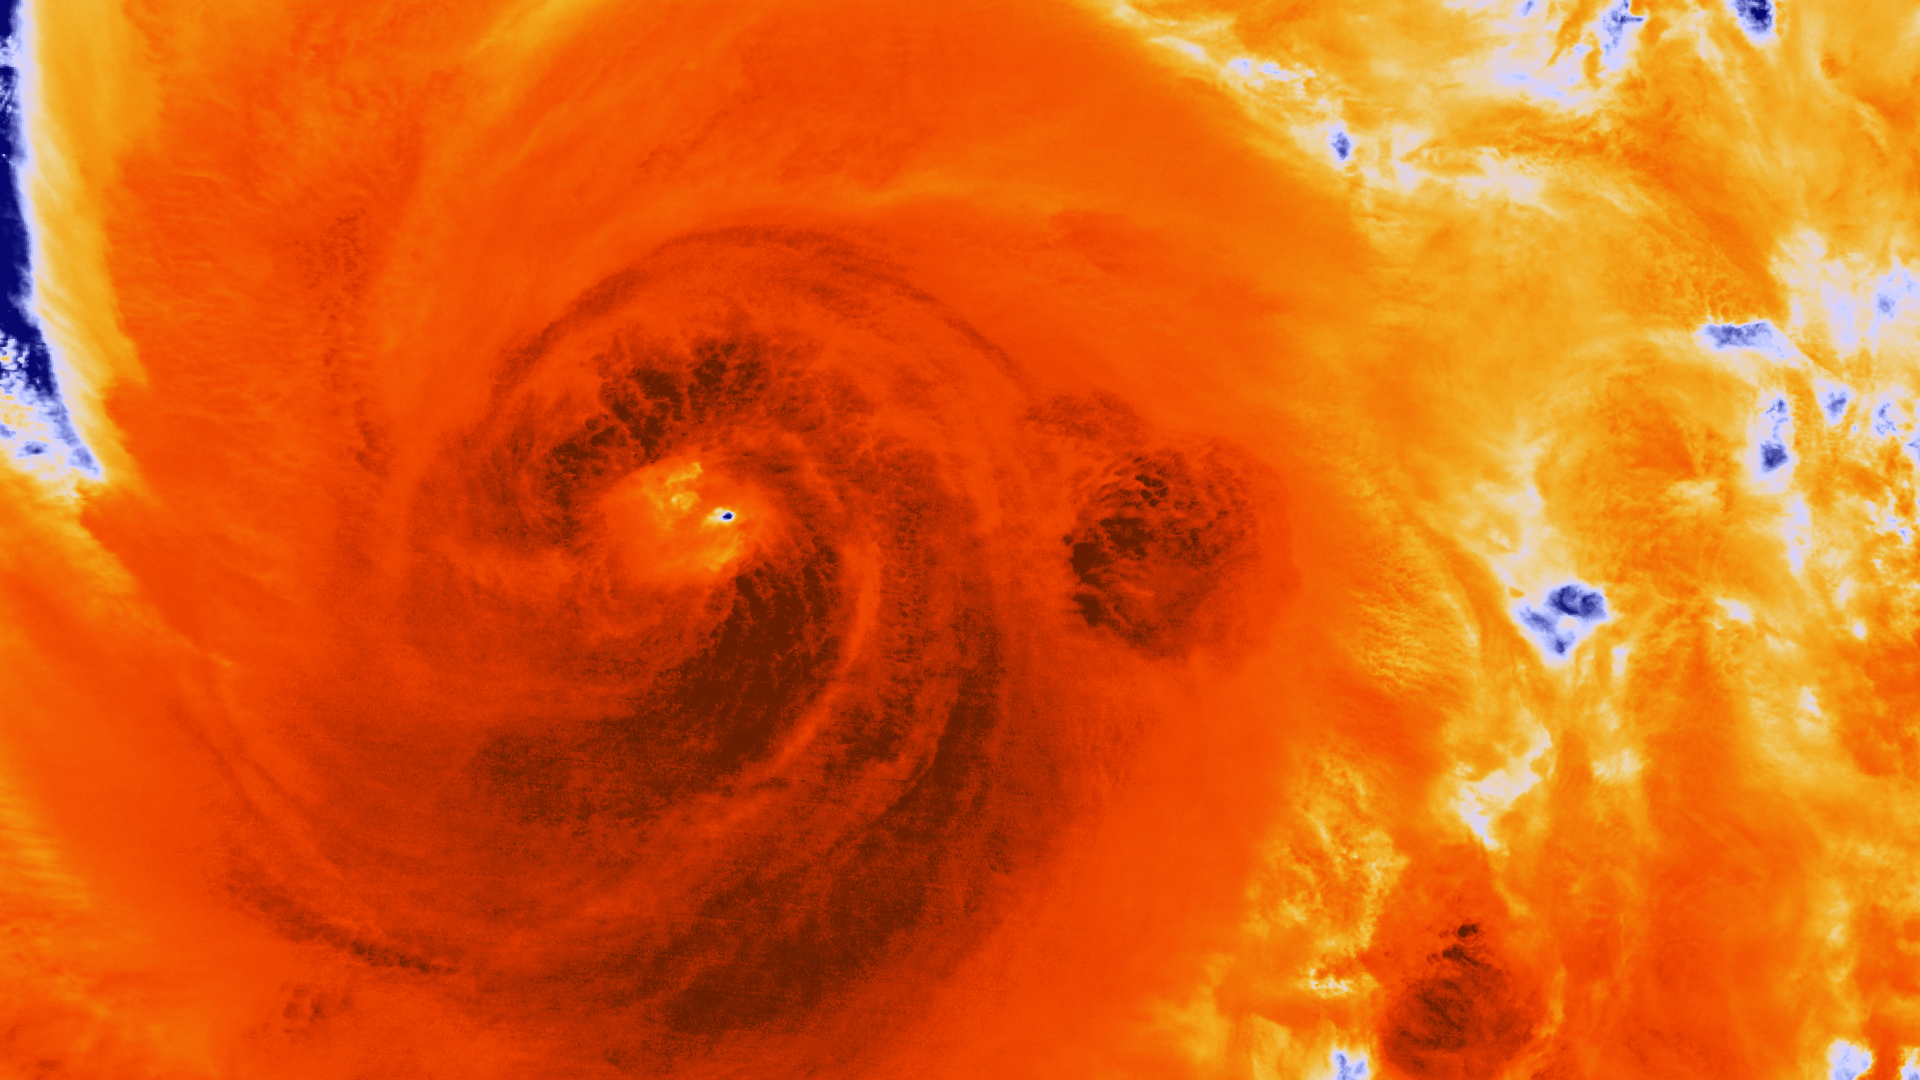 Satellite Captures Detailed Imagery of Hurricane Sandy Intensification